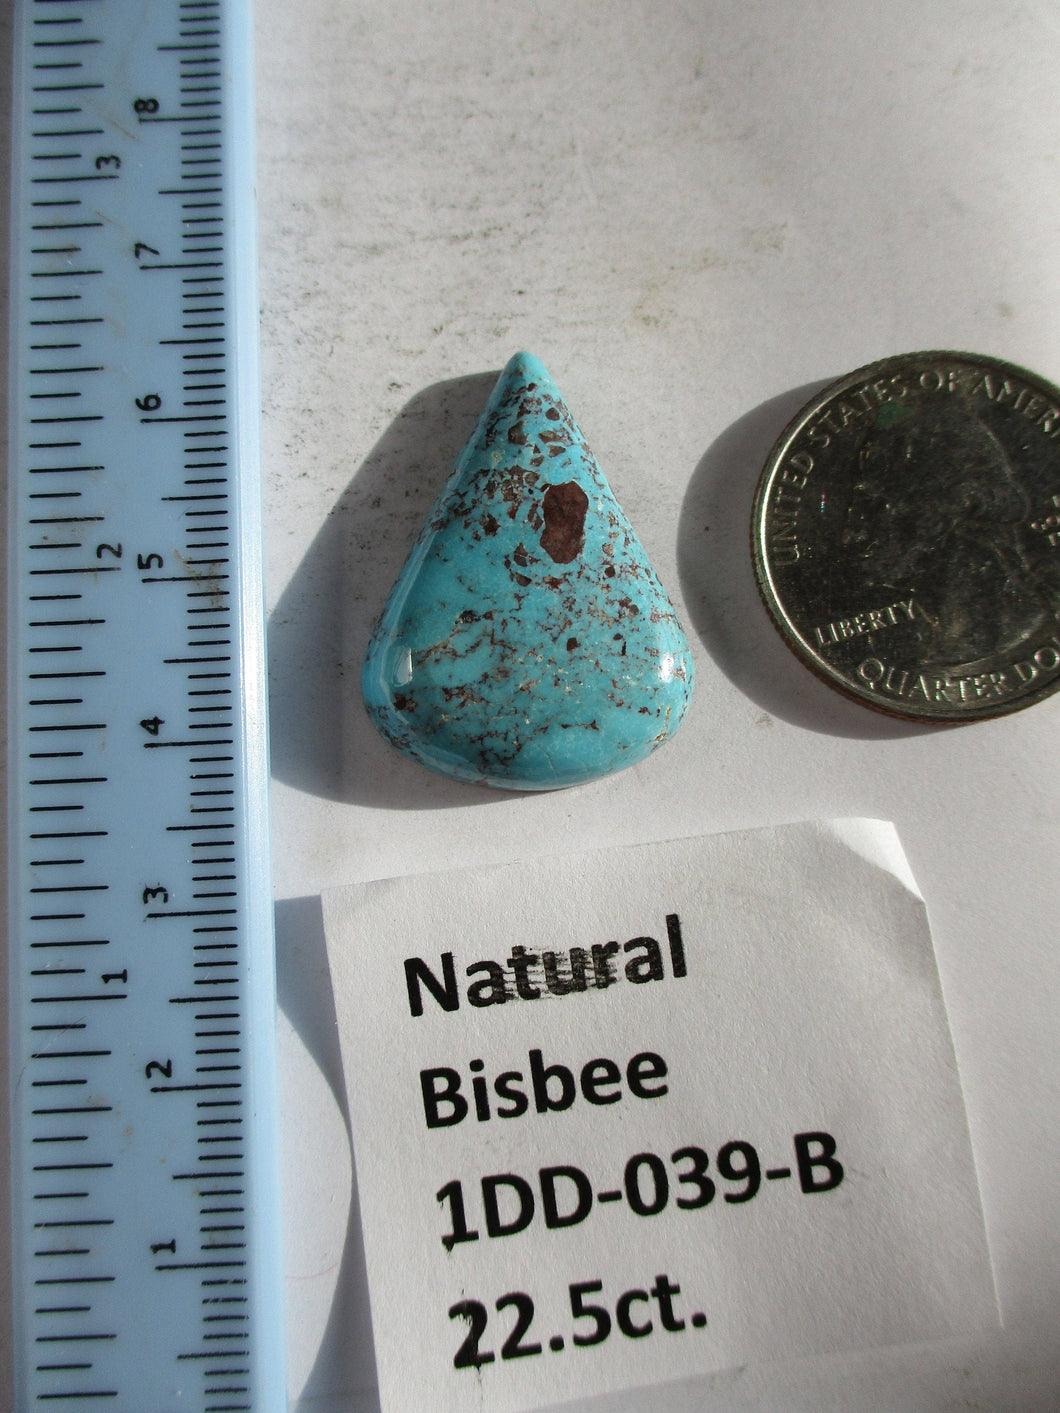 22.5 ct. (29x21x6 mm) Natural Bisbee Turquoise Cabochon Gemstone, 1DD 039